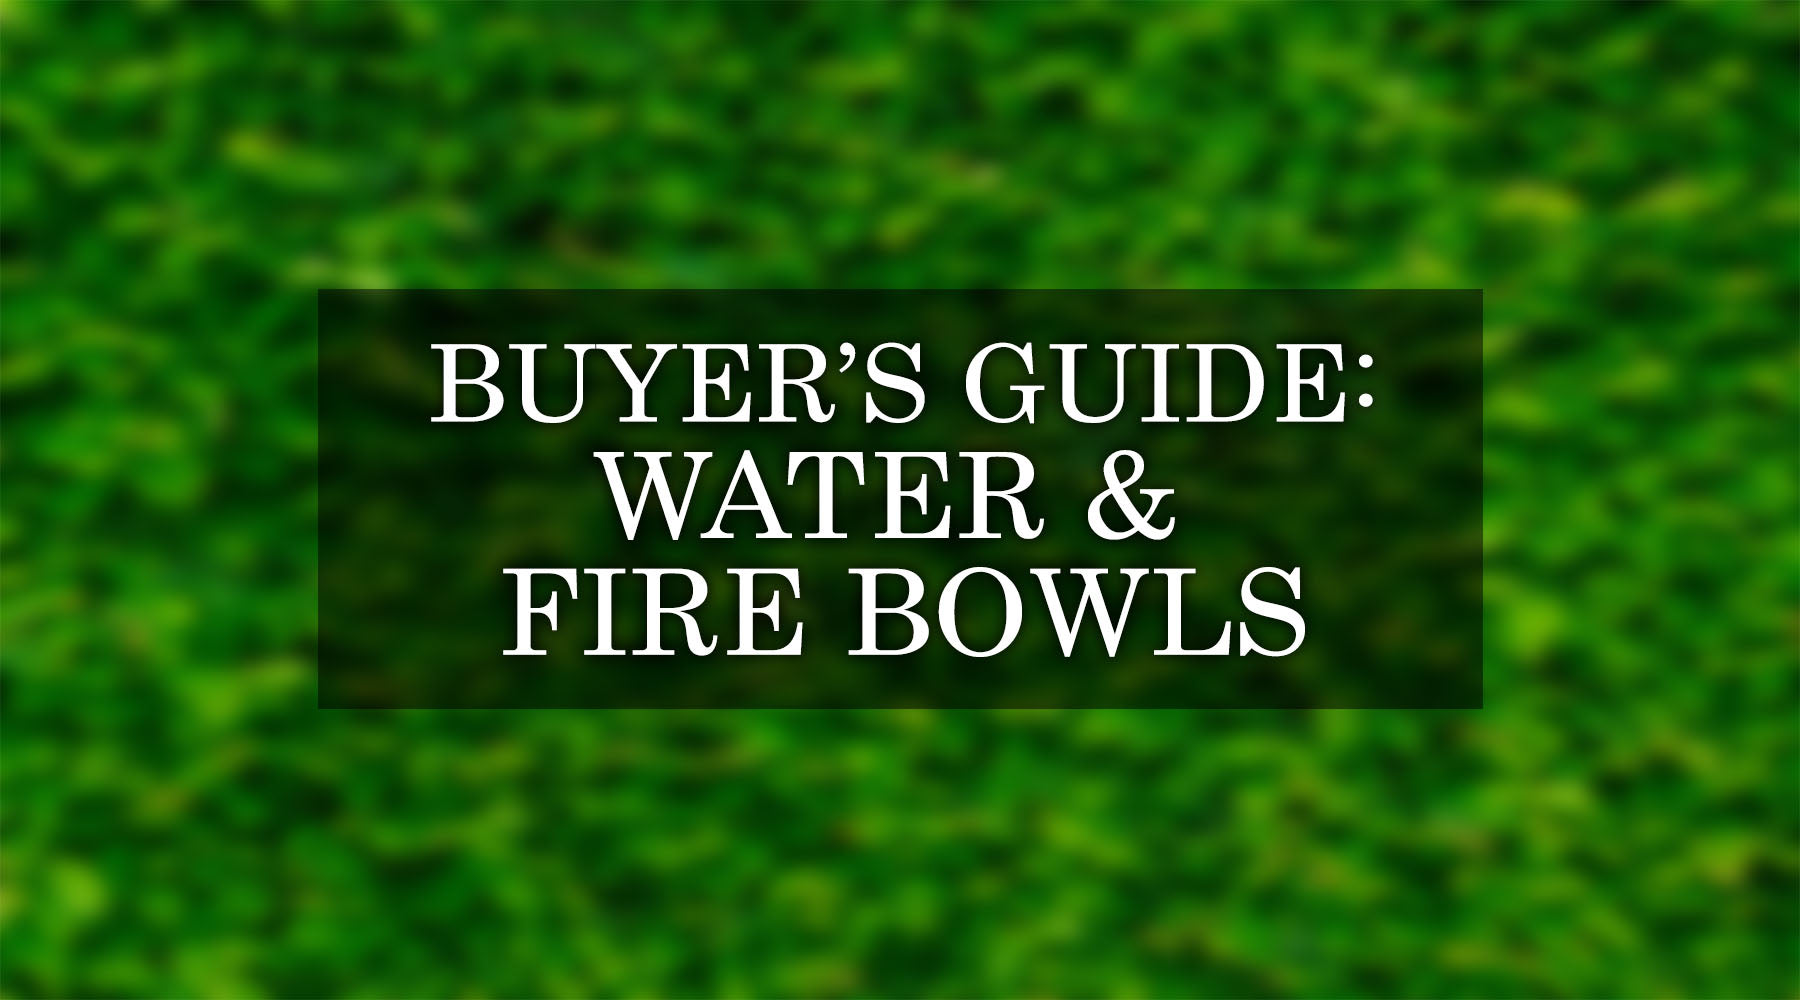 The Complete Buyer’s Guide For Water and Fire Bowls